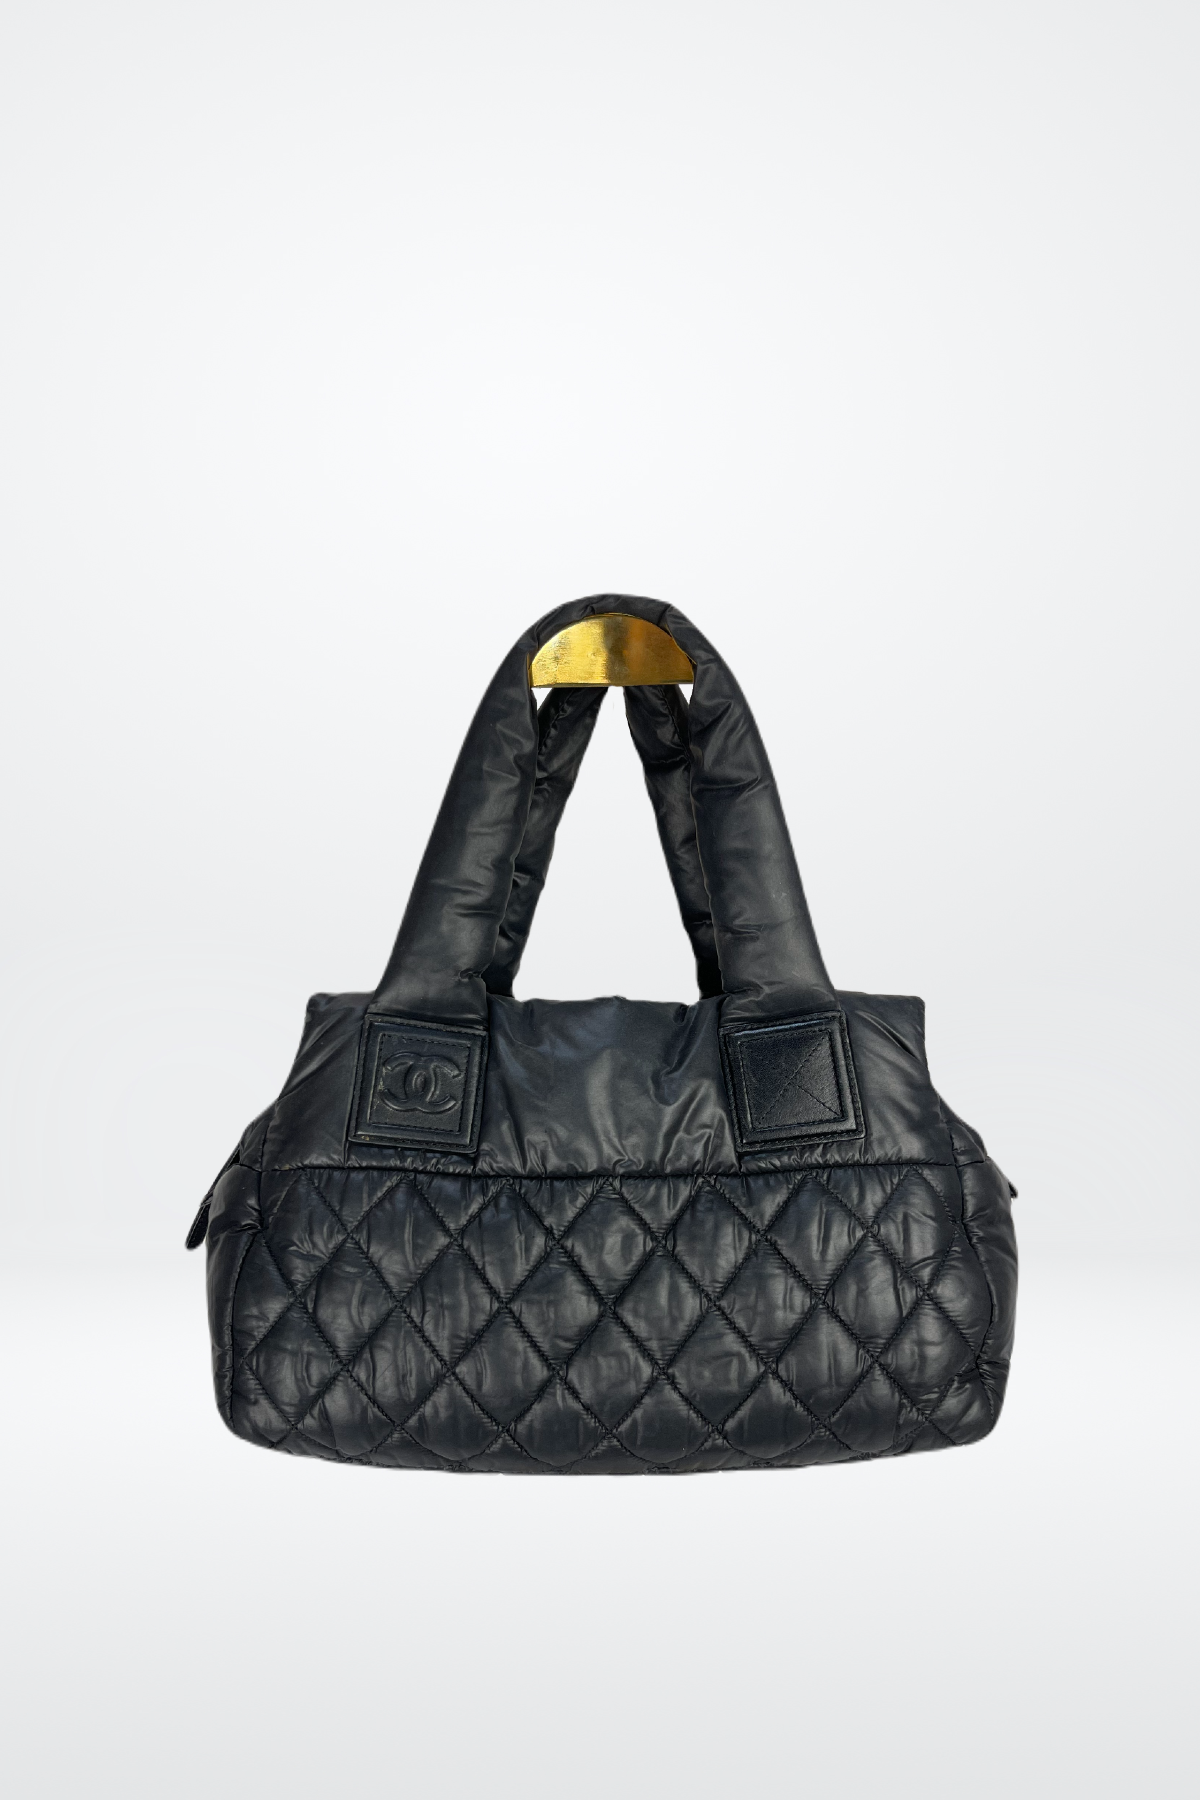 Chanel Quilted Nylon Puffer Bag  - Coco Cocoon Bowling Bag